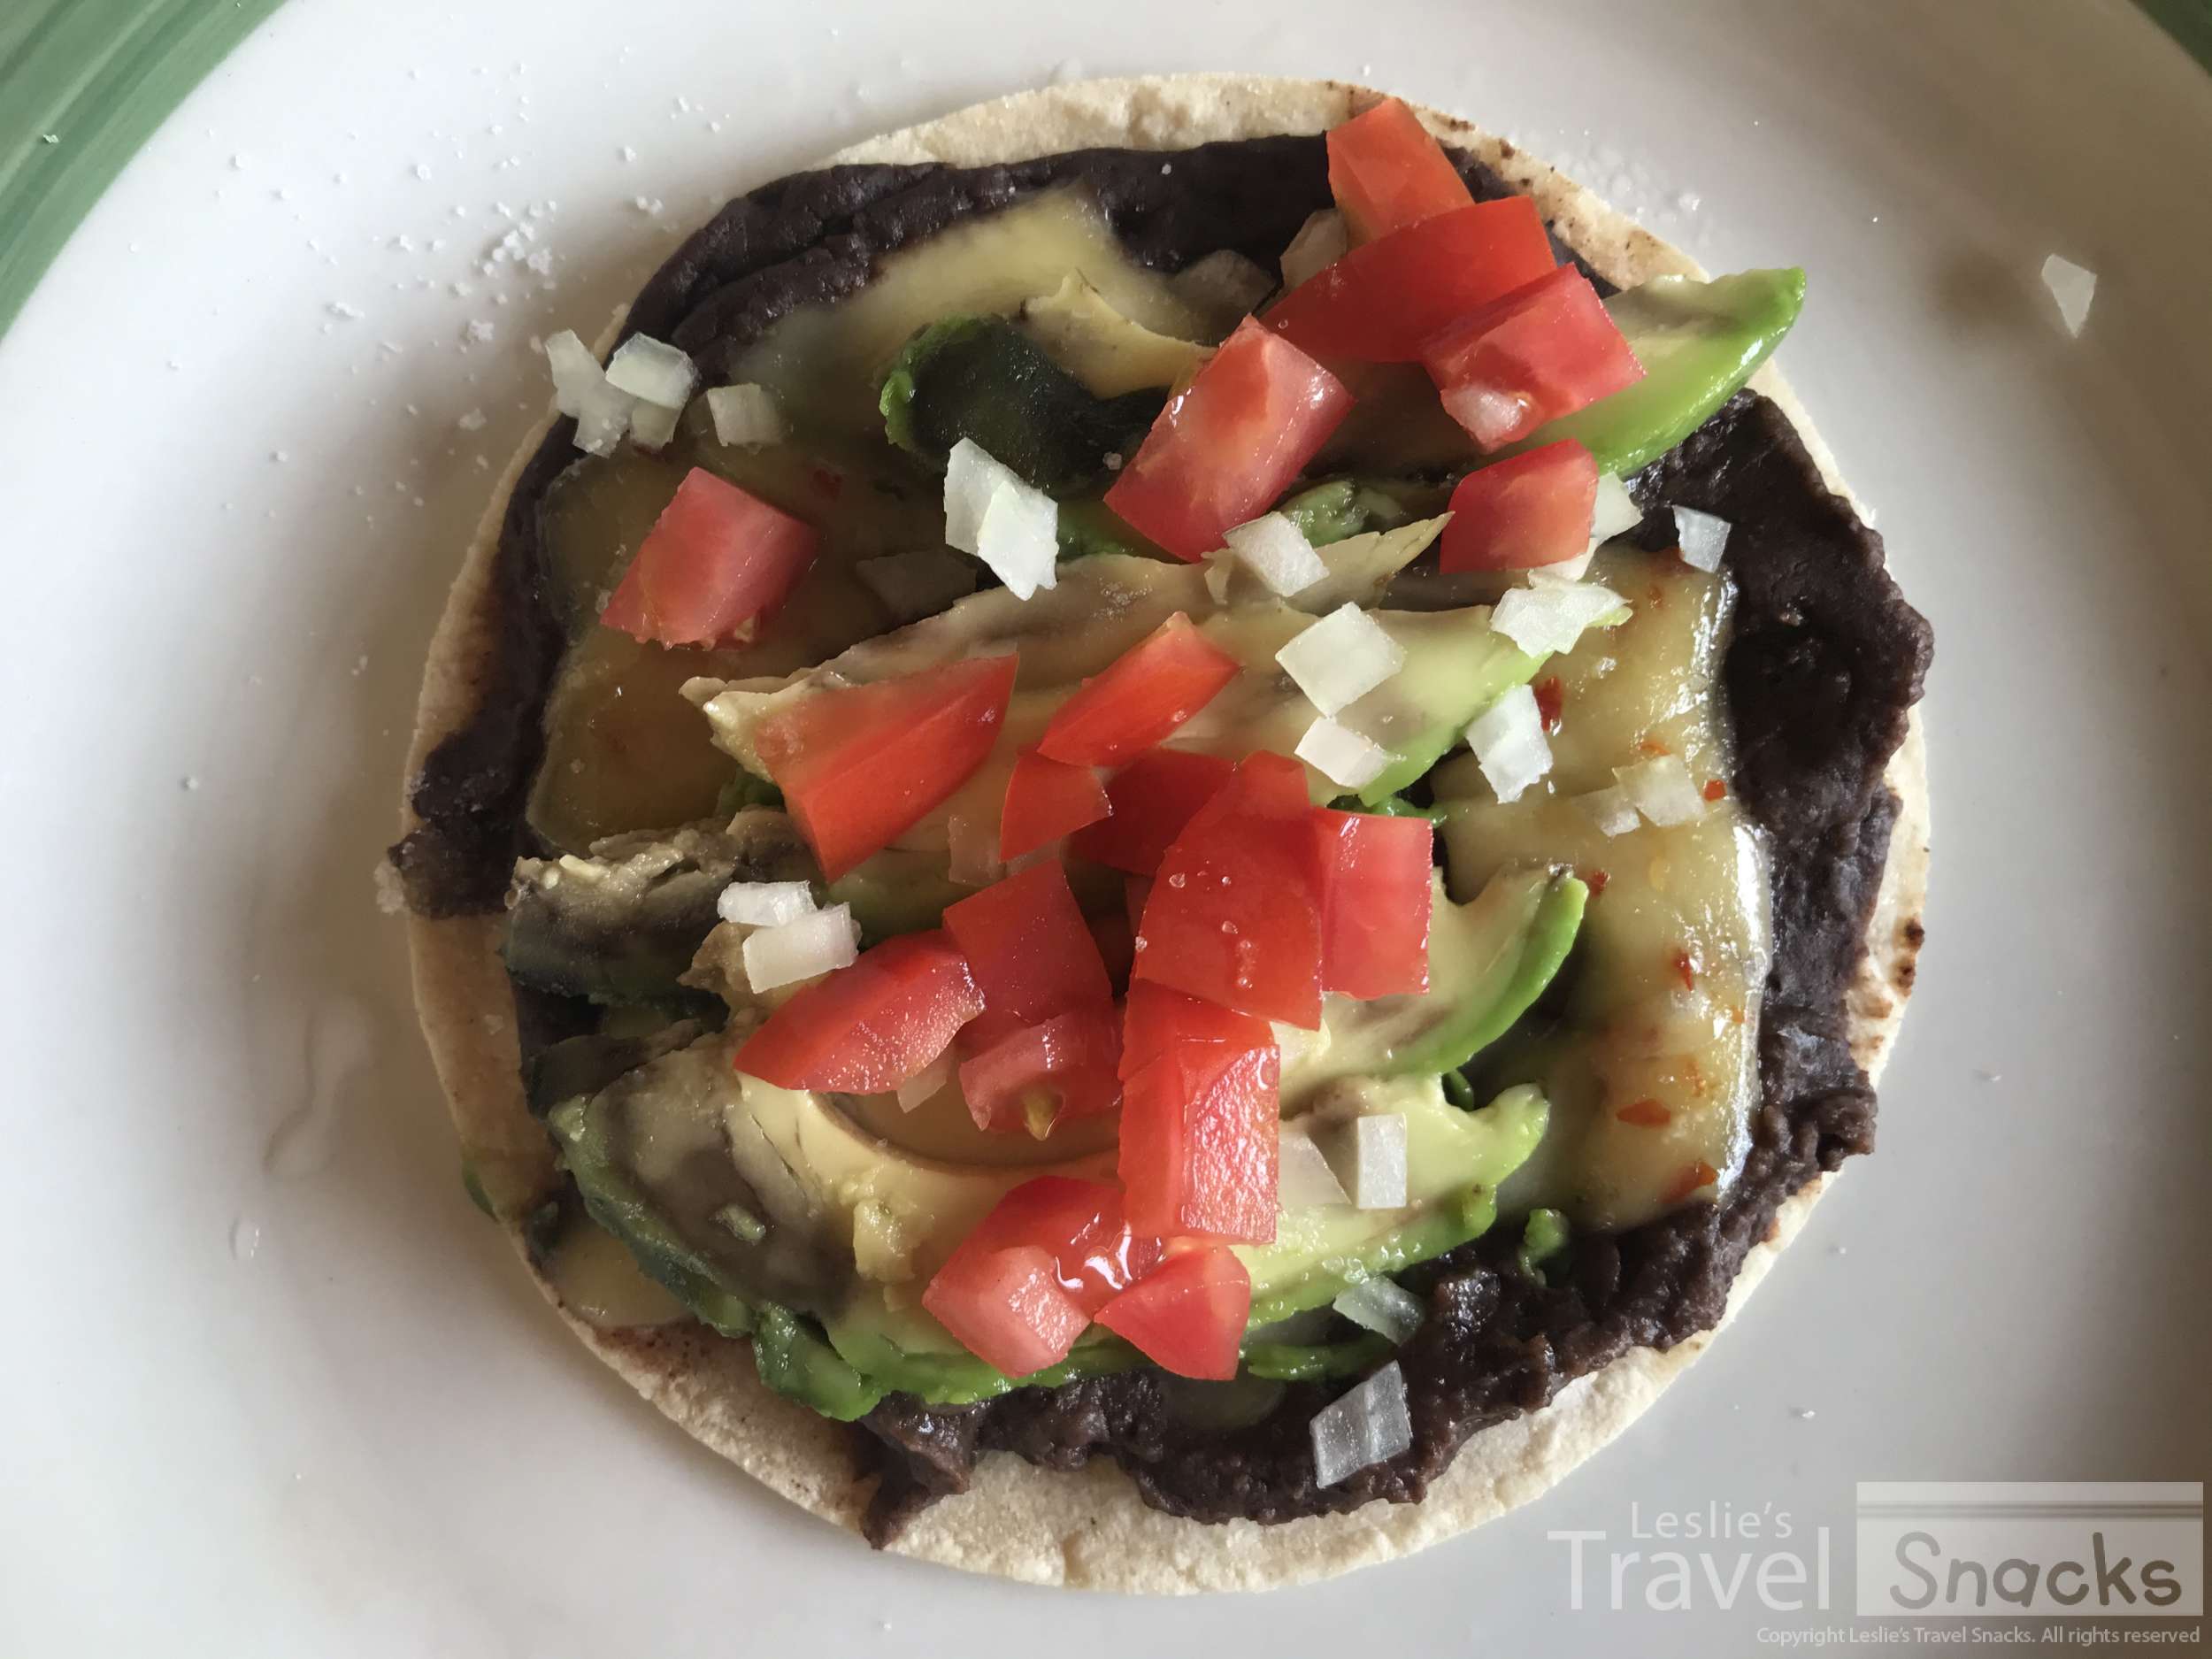 Smaller portions just come naturally when you're budget traveling.